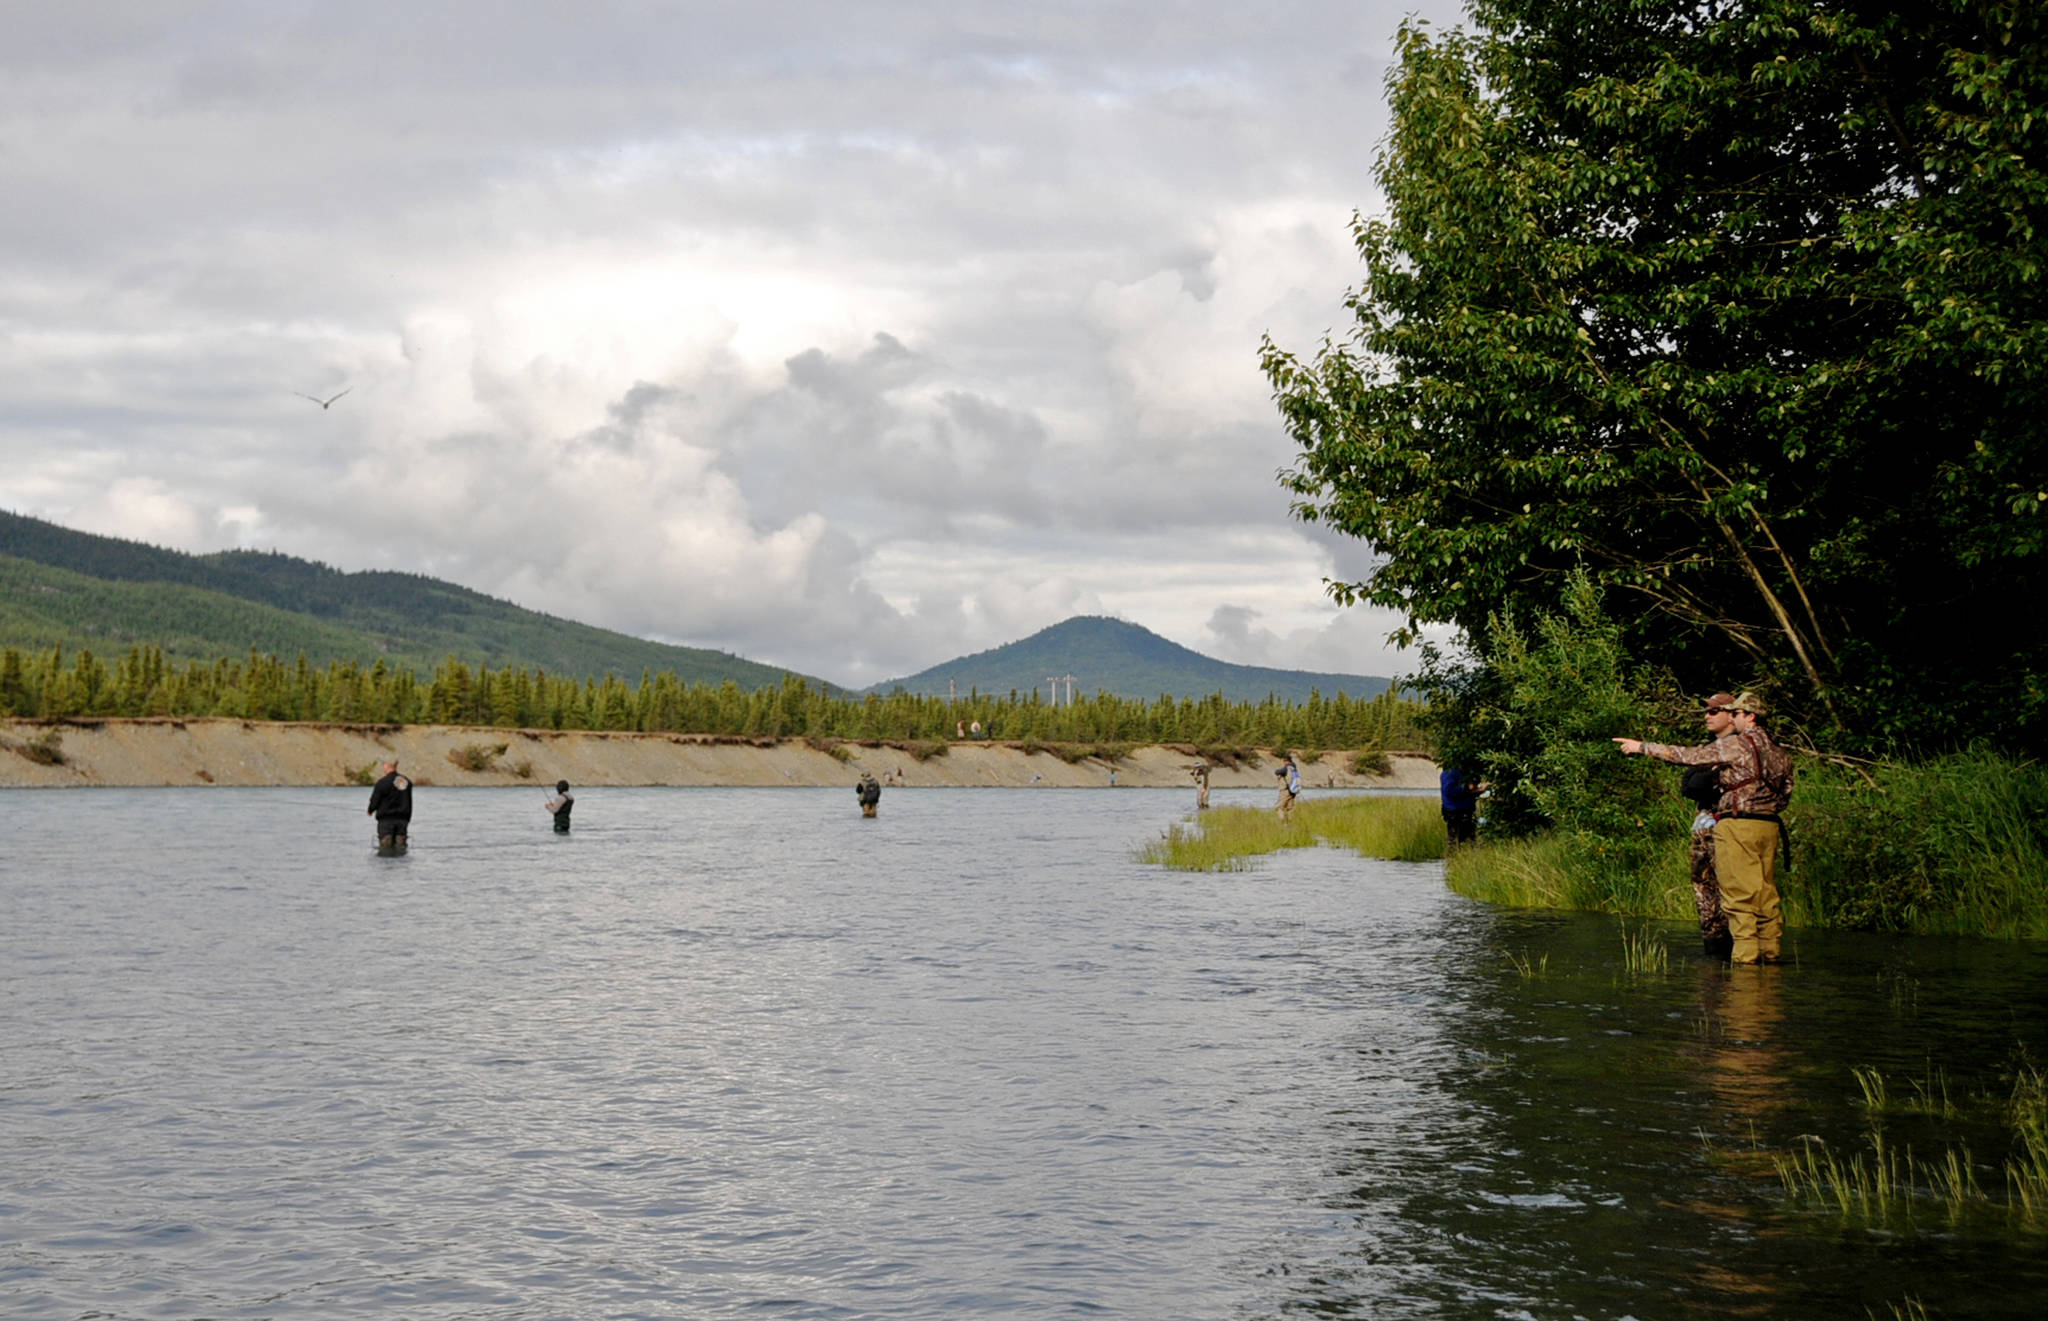 Anglers try their luck for sockeye salmon on the Kenai River near the Russian River confluence in this June 2016 photo on the Kenai National Wildlife Refuge, Alaska. (Elizabeth Earl/Peninsula Clarion, file)  Anglers try their luck for sockeye salmon on the Kenai River near the Russian River confluence in this June 2016 photo on the Kenai National Wildlife Refuge. (Elizabeth Earl/Peninsula Clarion, file)